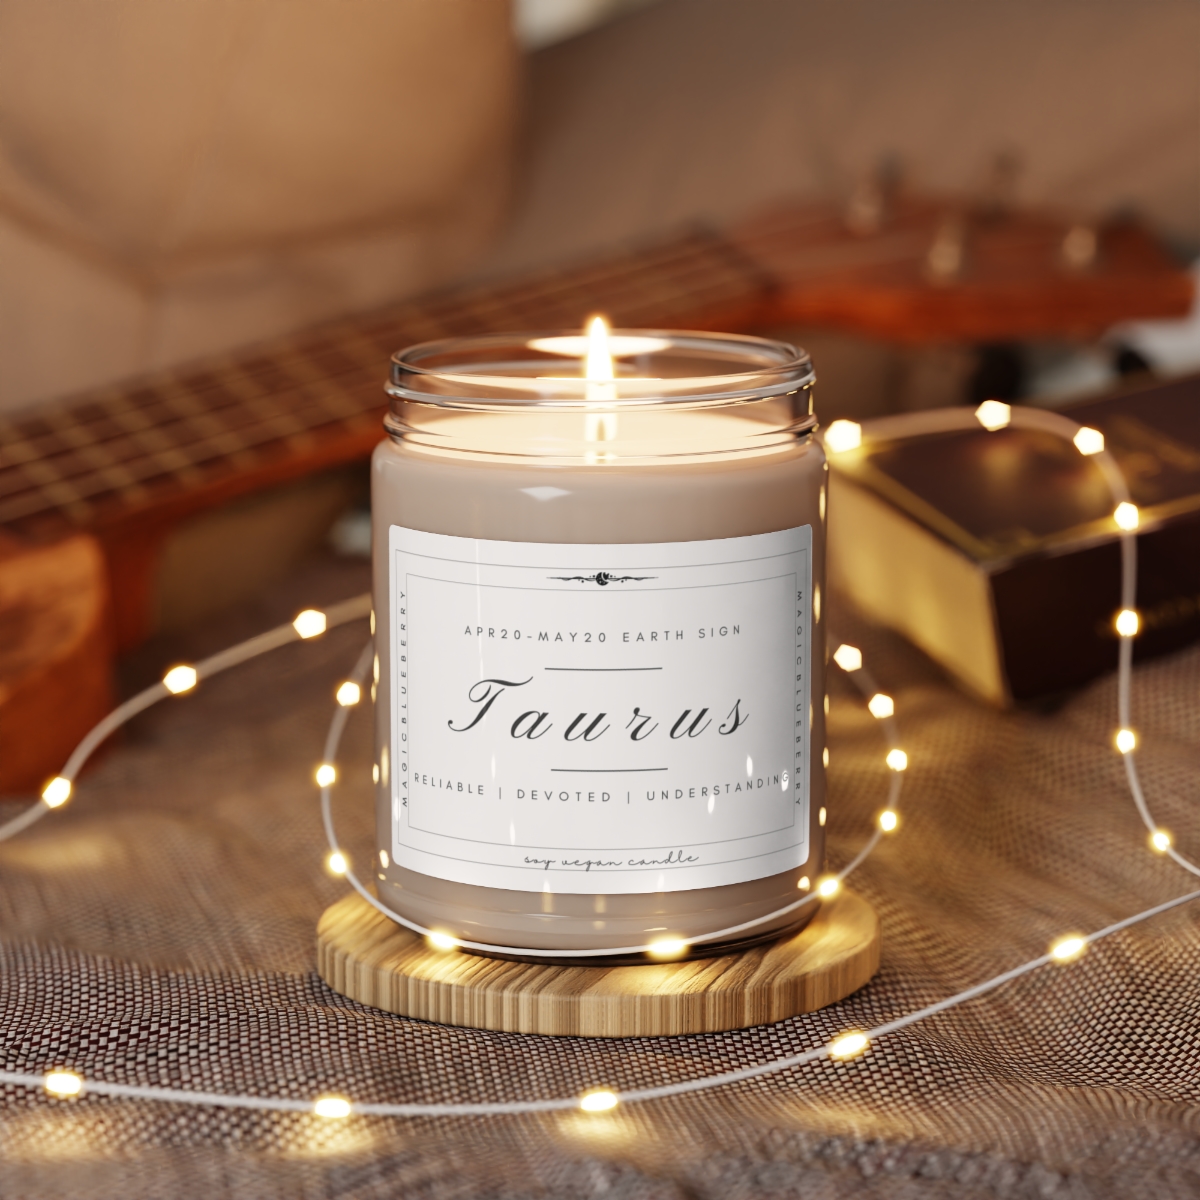 Taurus - Scented Vegan Soy Wax Candle Clear Jar Candle, Spell Candle, Sassy Candle Vegan Candle Cotton Wick Candle Home Deco product main image